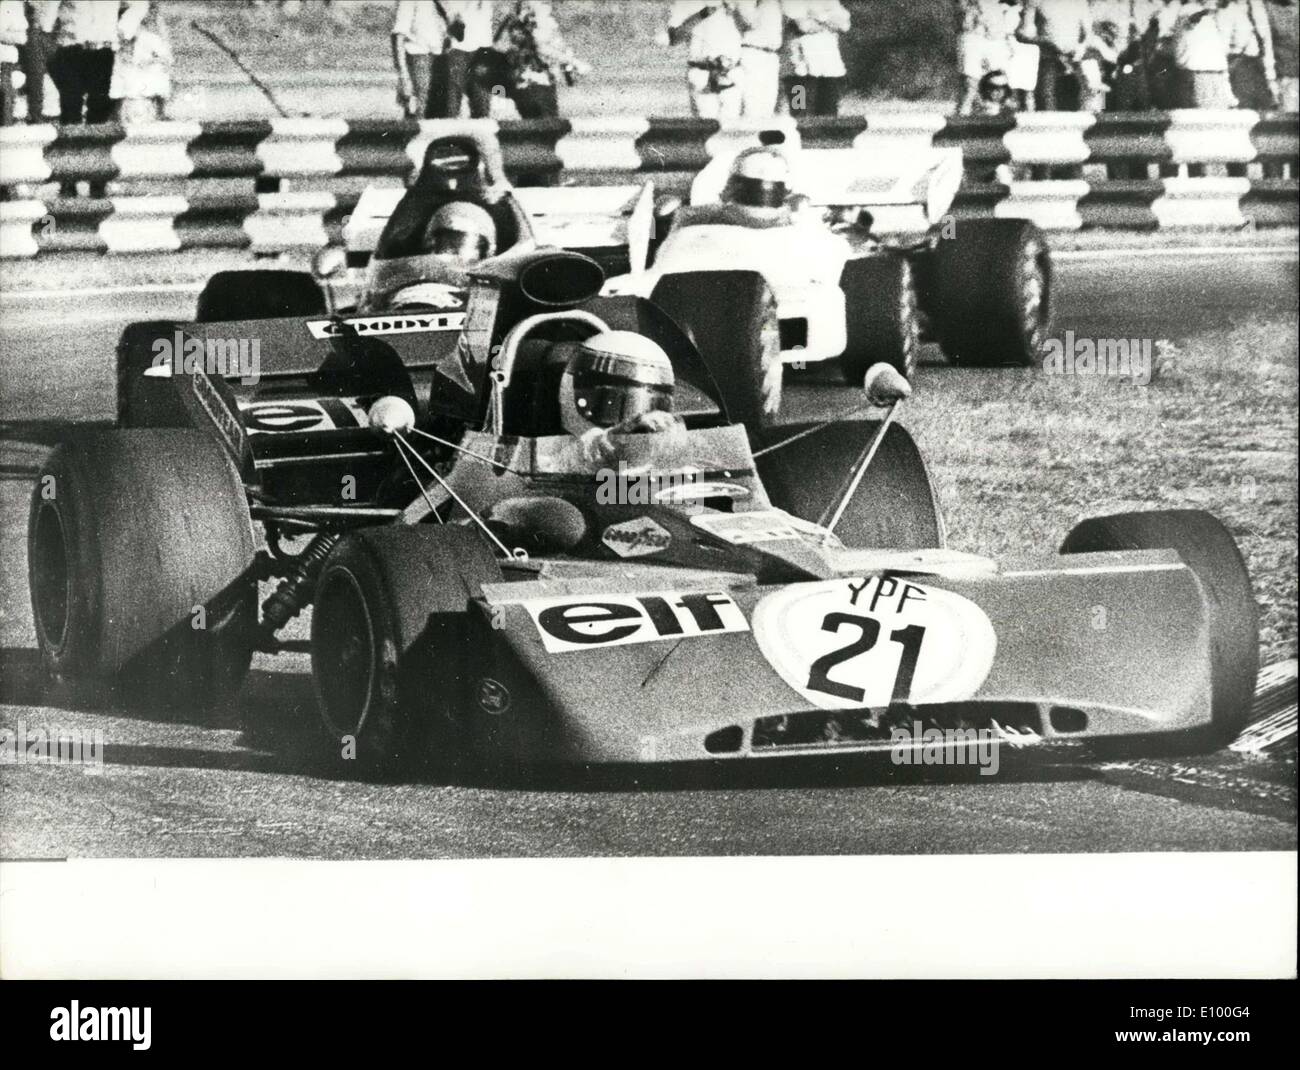 Jan. 27, 1972 - Jackie Stewart wins Grand Prix of Argentine: Driving a Tyrrell Ford, Jackie Stewart won the Grand Prix of the Argentine in Buenos Aires last Sunday. Denis Hulme, of New Zealand, driving a McLaren racer was second, and Jacky Ickx, of Belgium, in a Ferrari, was third. Photo shows Jacke Stewart (No.21) on his way to victory during the race. Stock Photo